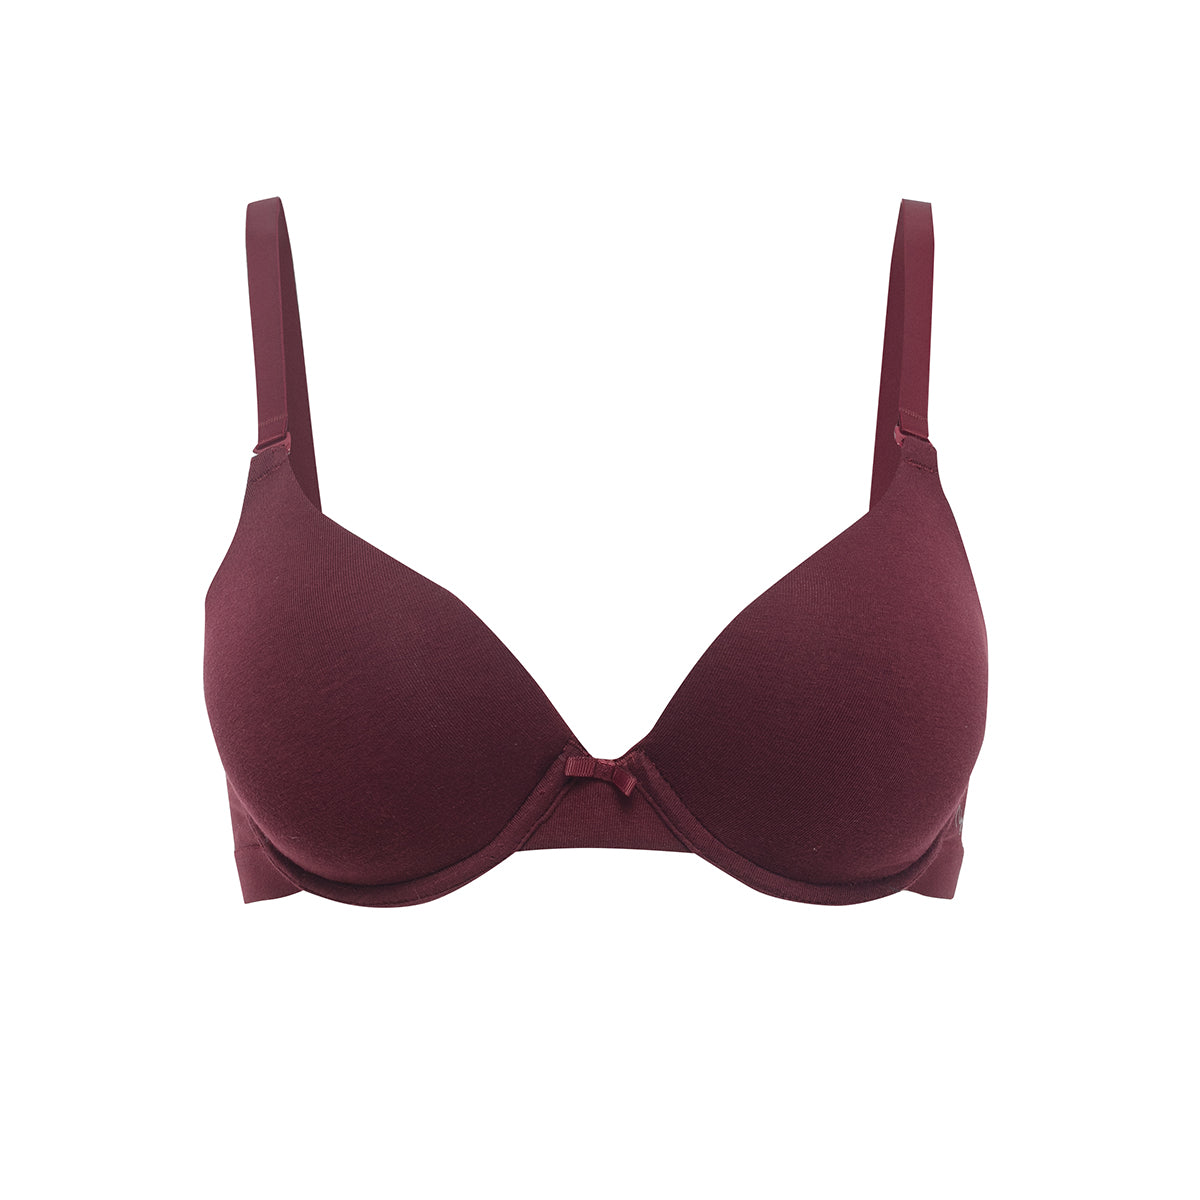 Breathe Cotton Padded wired Push up level-2 bra Demi coverage - Maroon NYB005